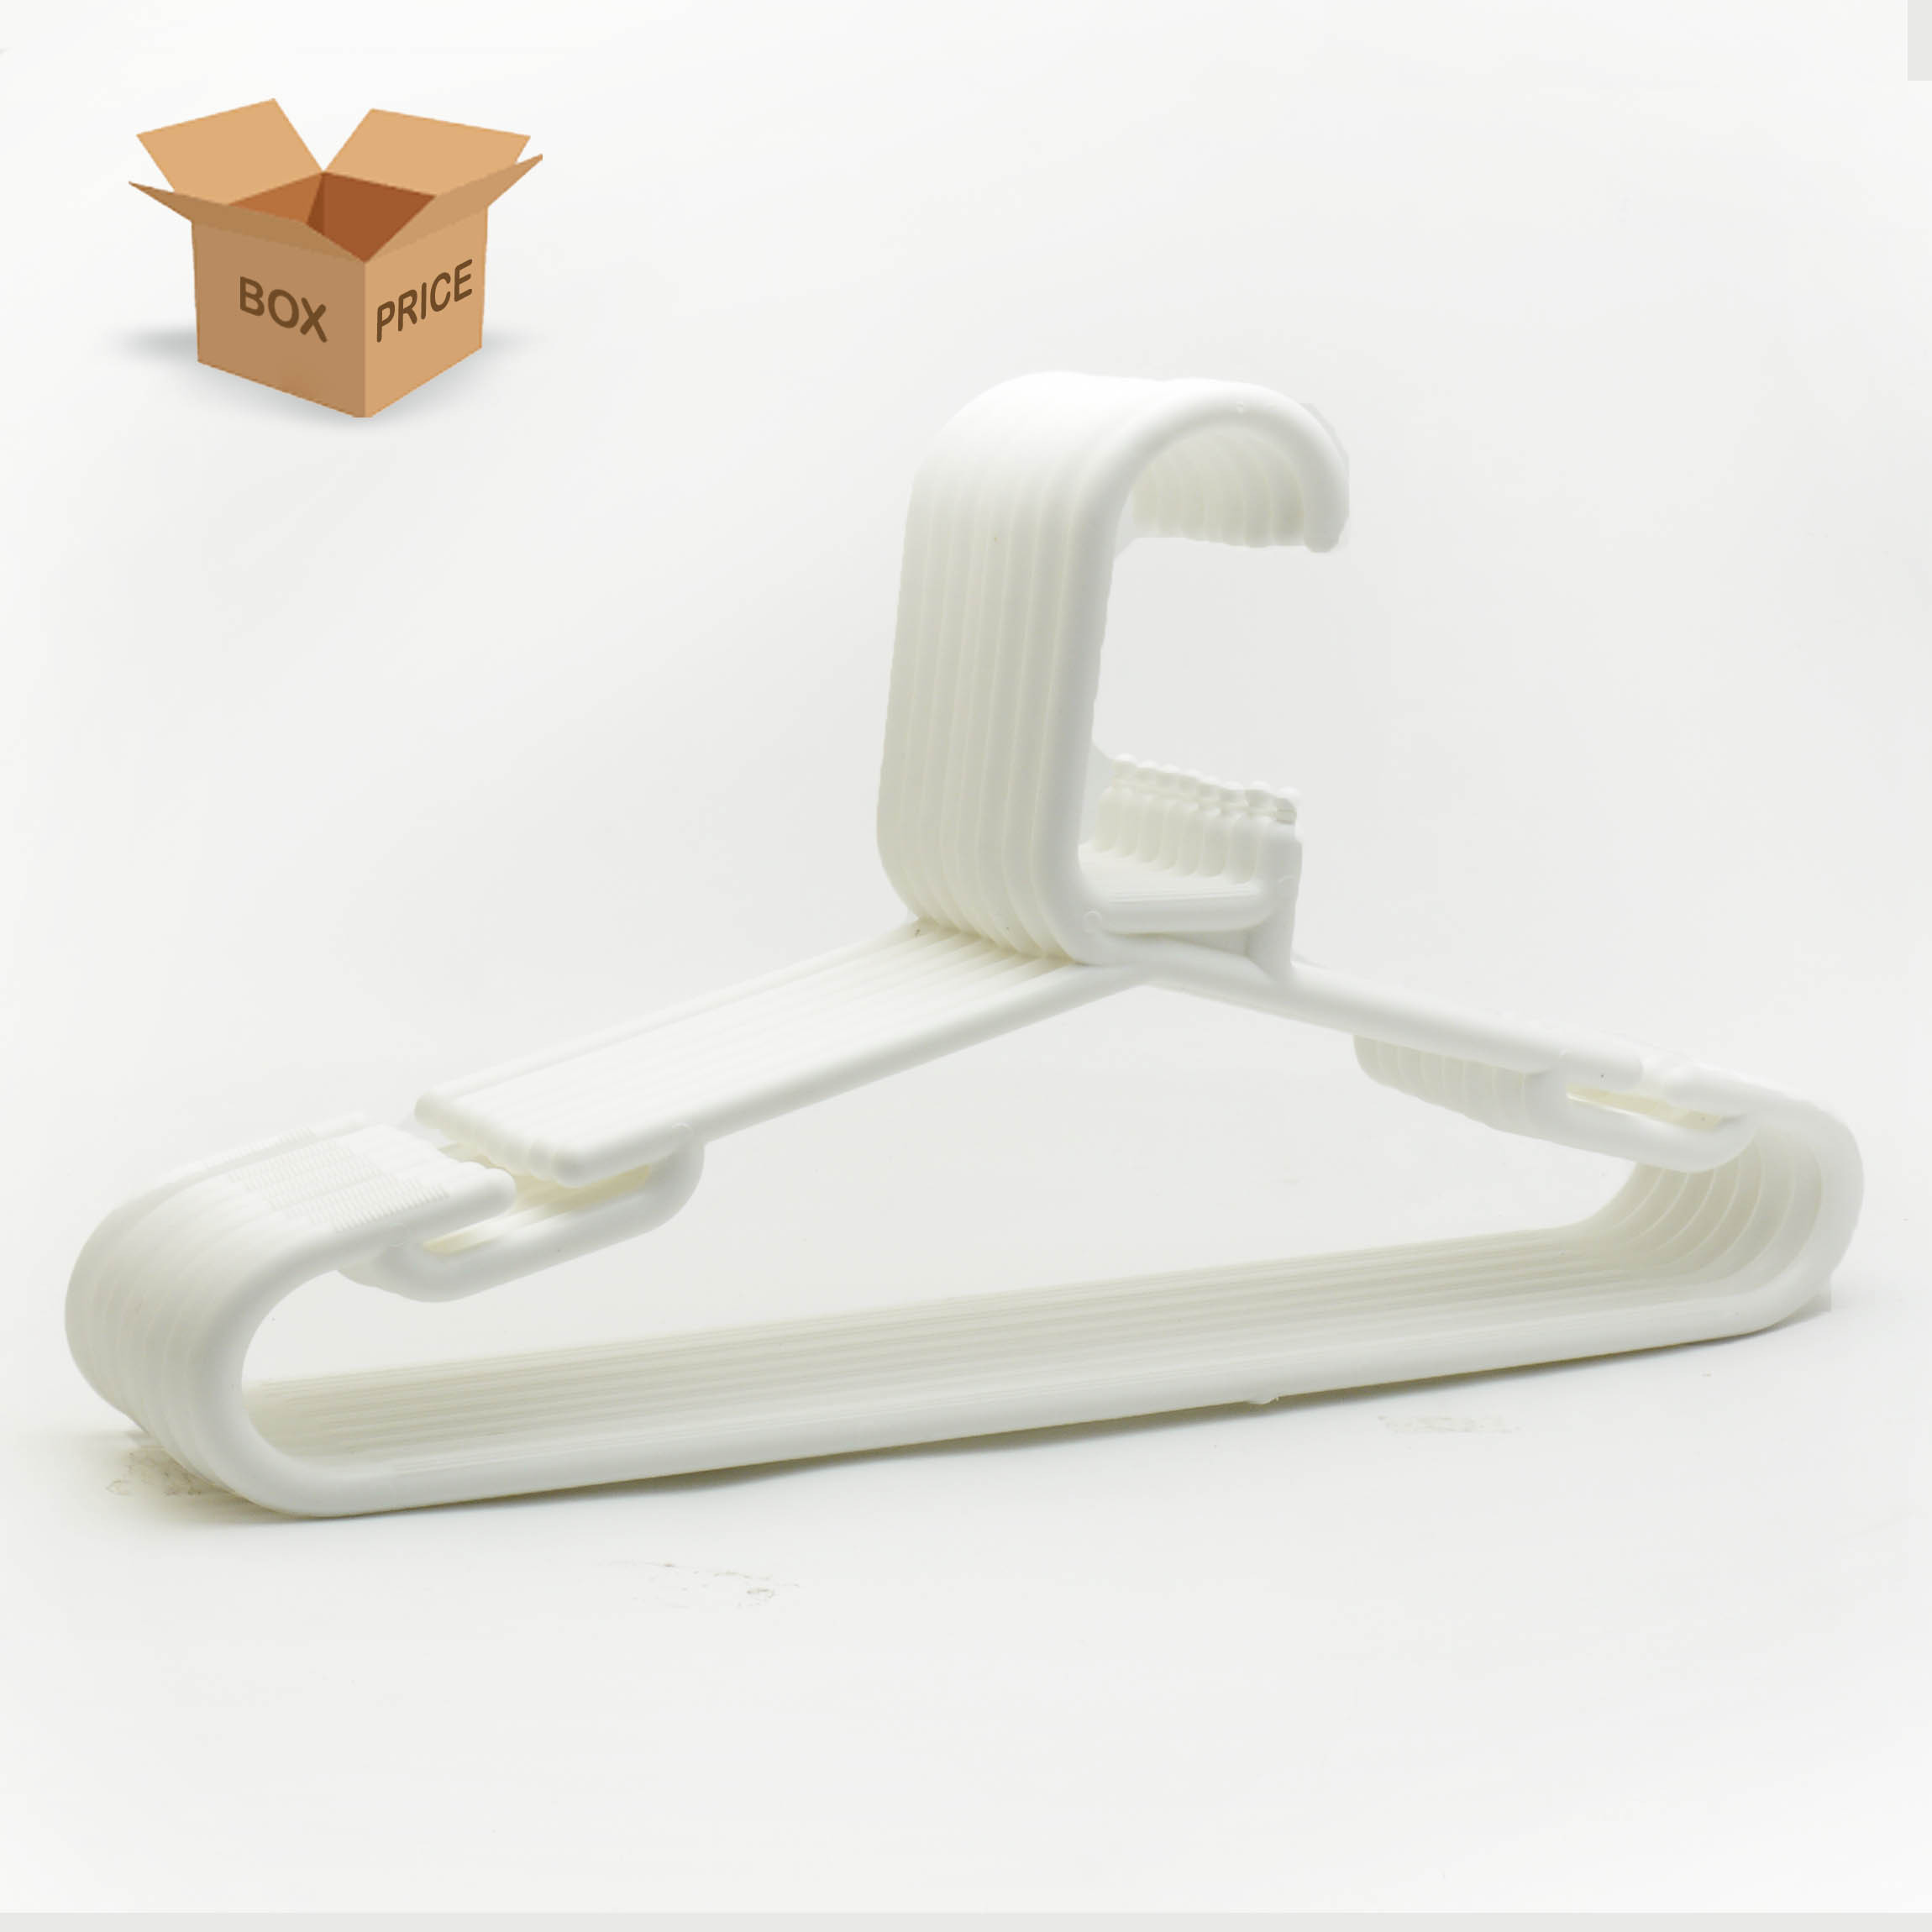 White Heavy-Duty Plastic Hangers with Trouser Bar and Shoulder